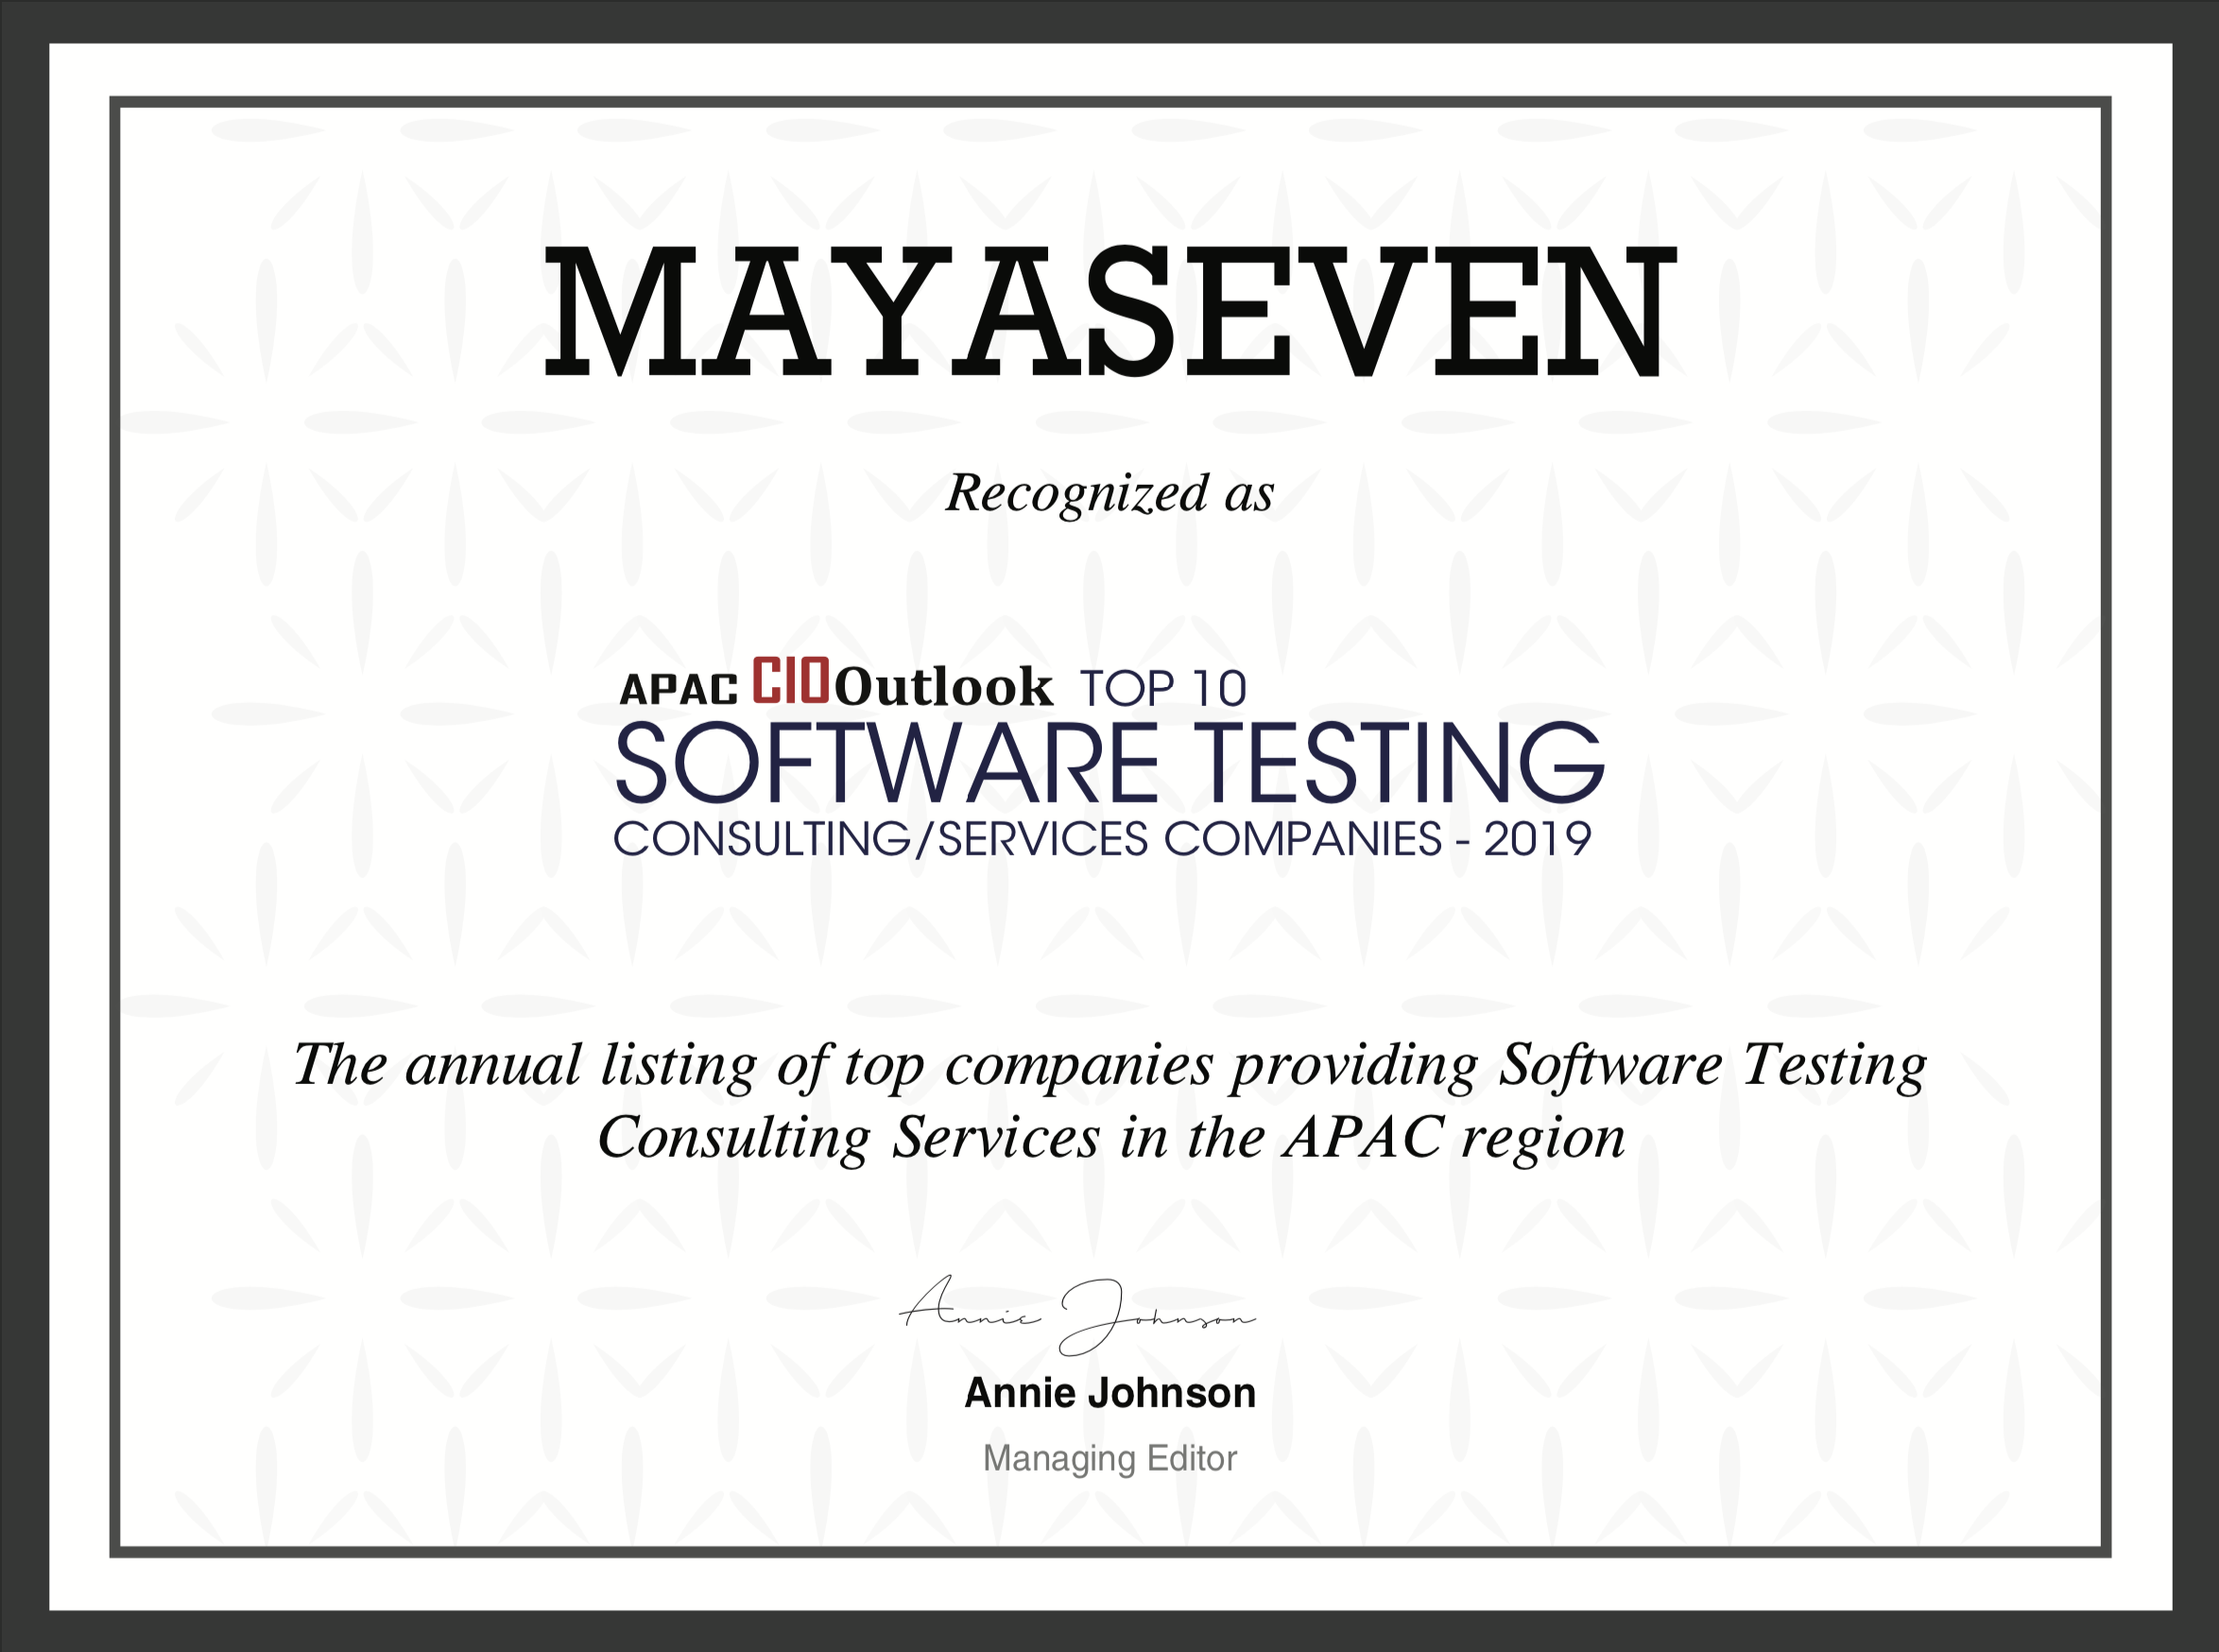 Top companies providing Software Testing Consulting Services in the APAC region